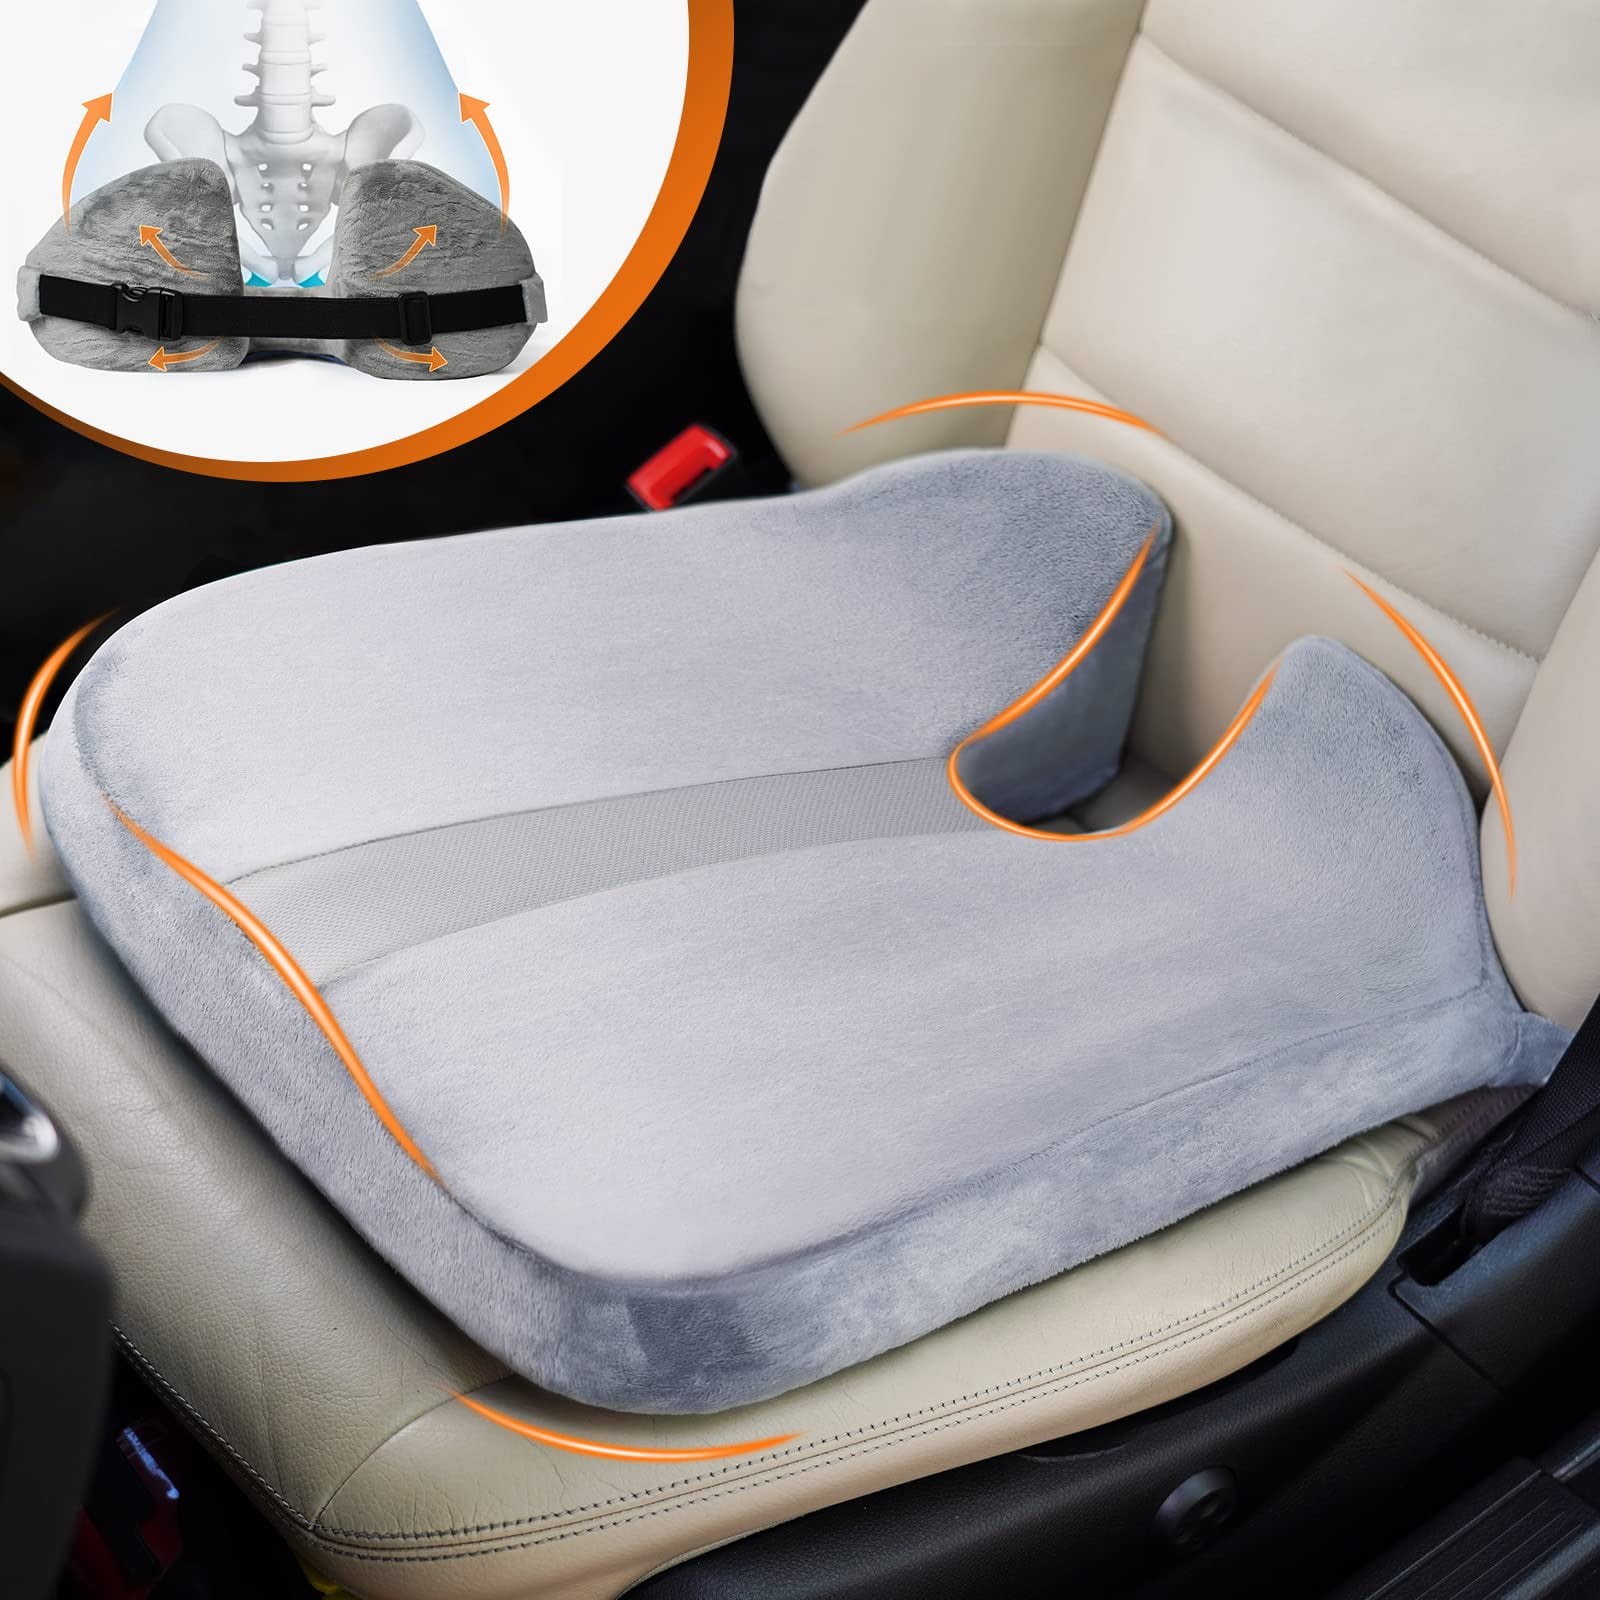 DrCarNow 2022 Upgrade Car Seat Cushion Coccyx Pad for Tailbone